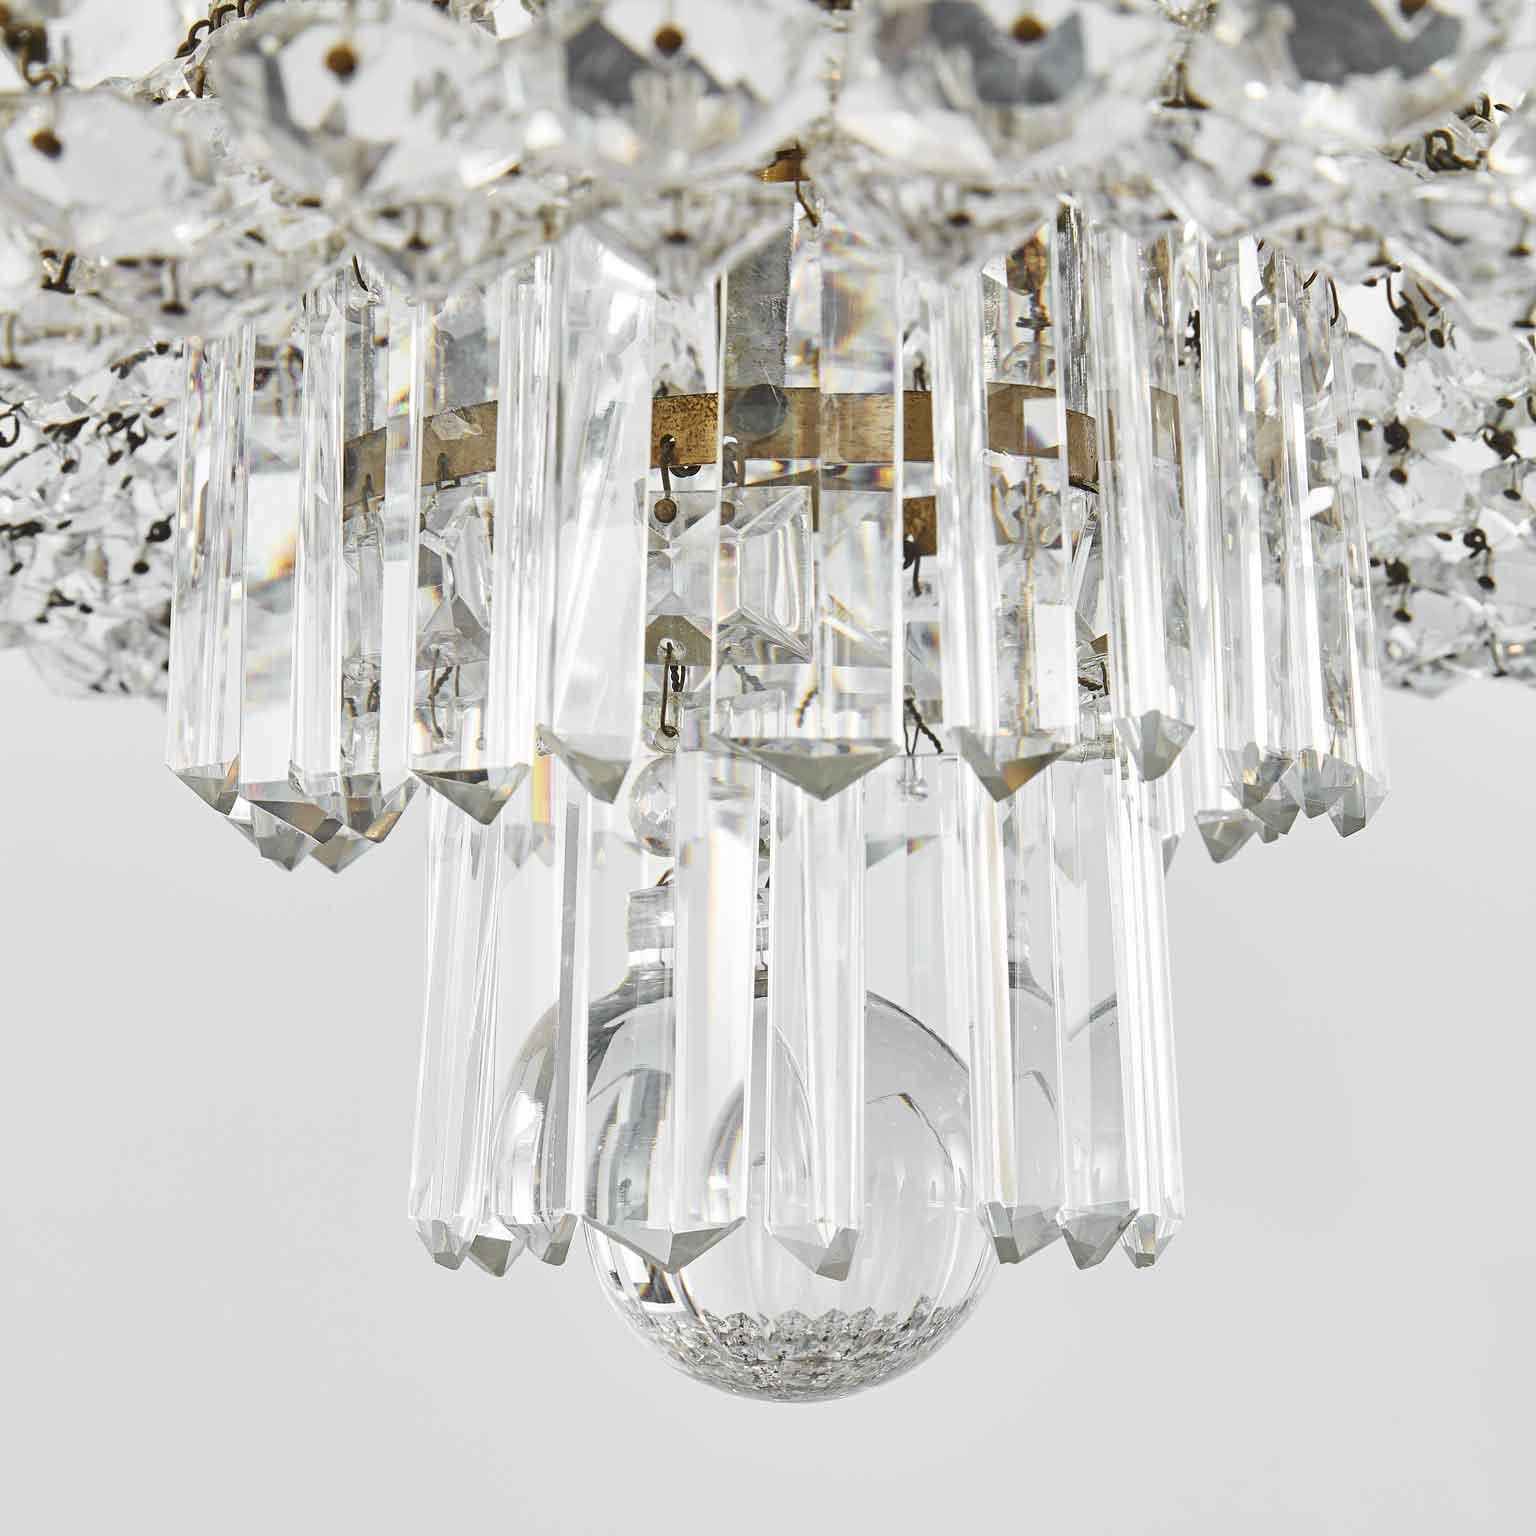 Faceted 20th Century Italian Crystal Oval Flush Mount Eight-Light Ceiling Fixture